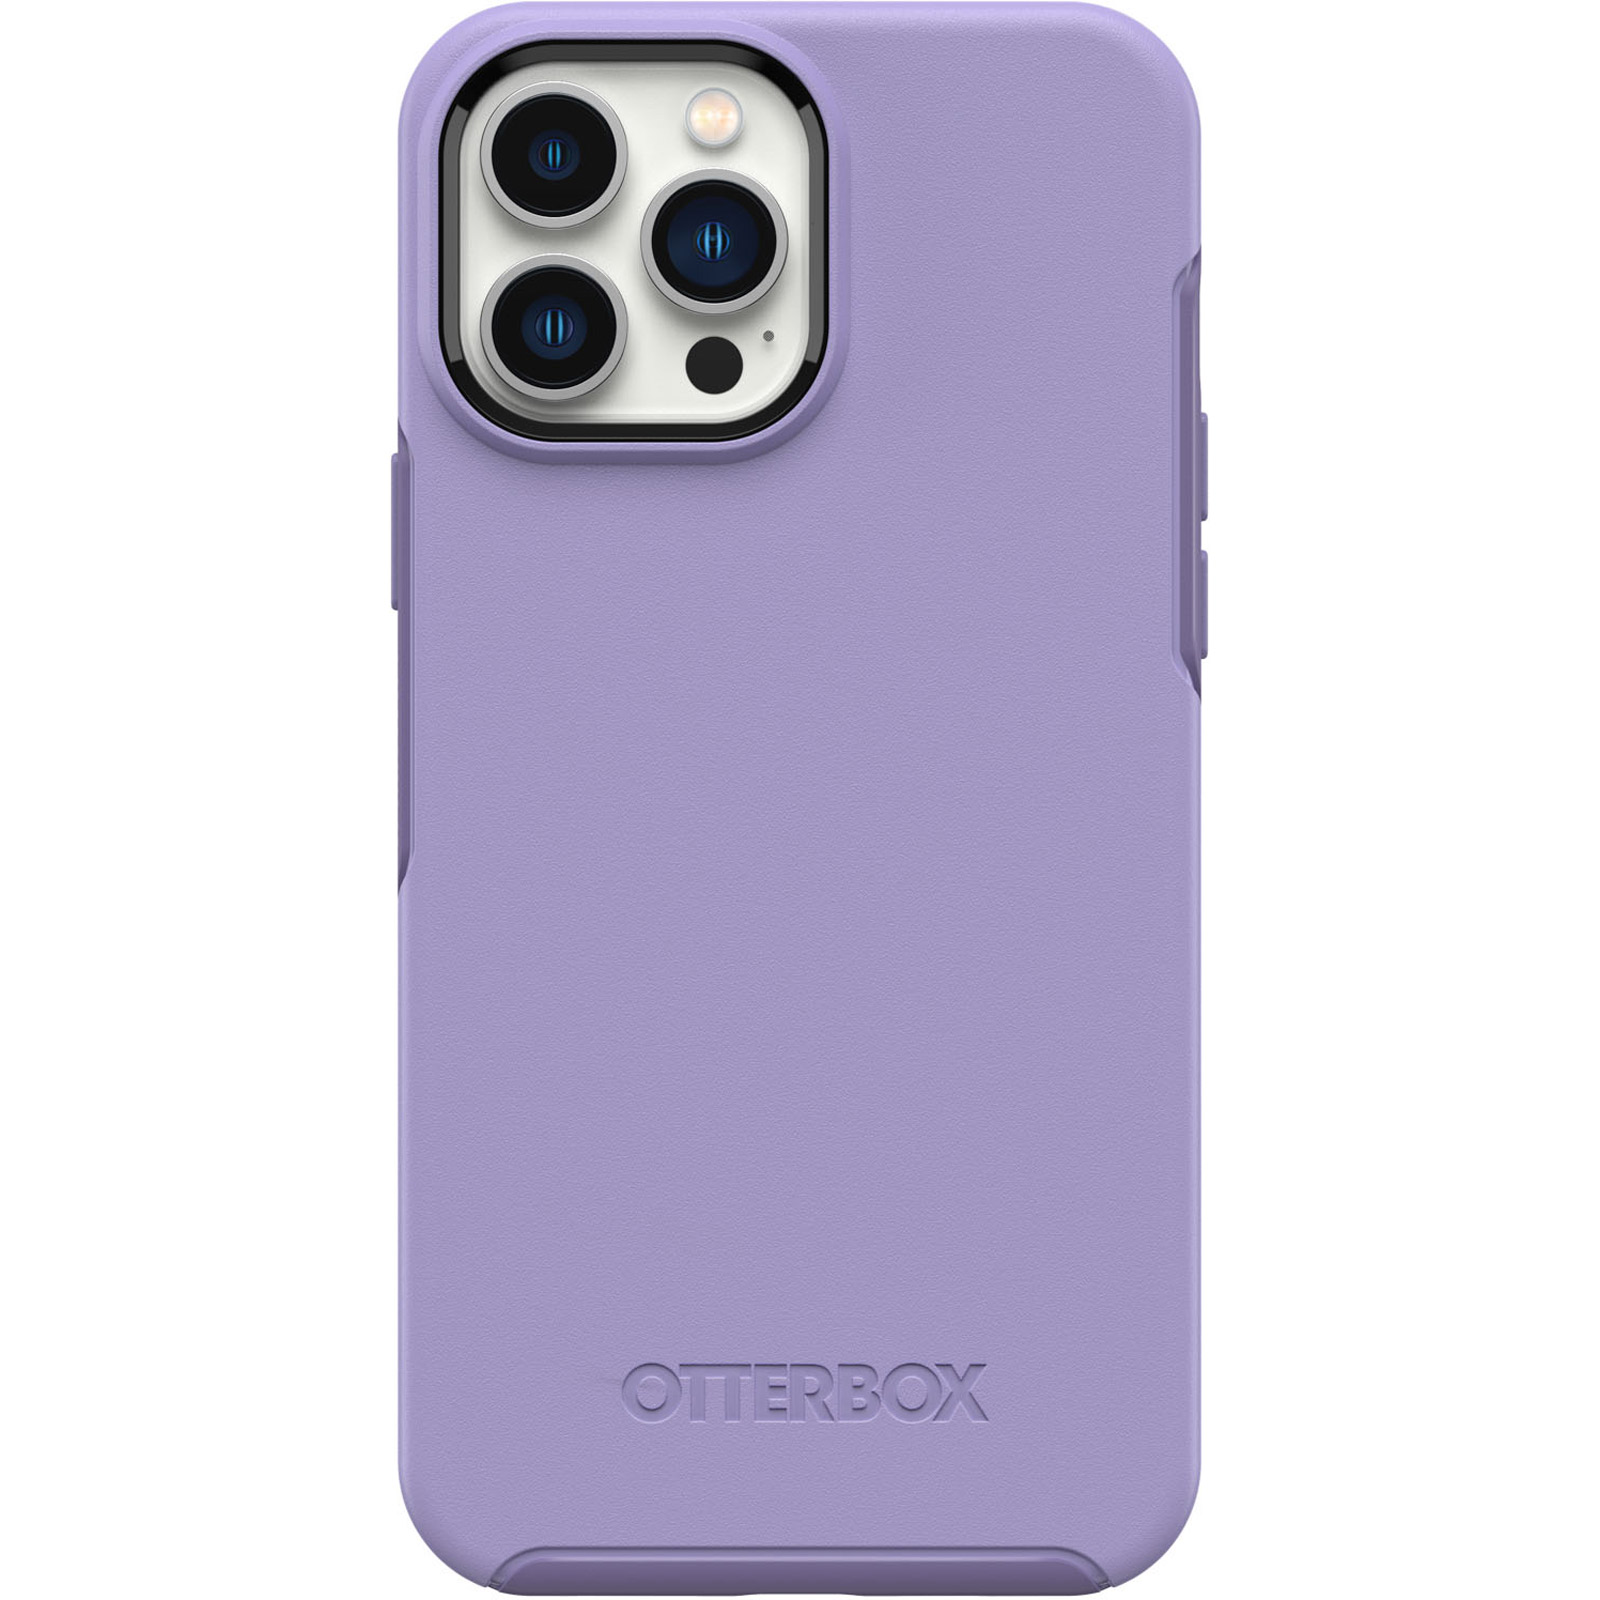 Ampd - Gold Bumper Soft Case with MagSafe for Apple iPhone 12 Pro / iPhone 12 - Lilac Purple